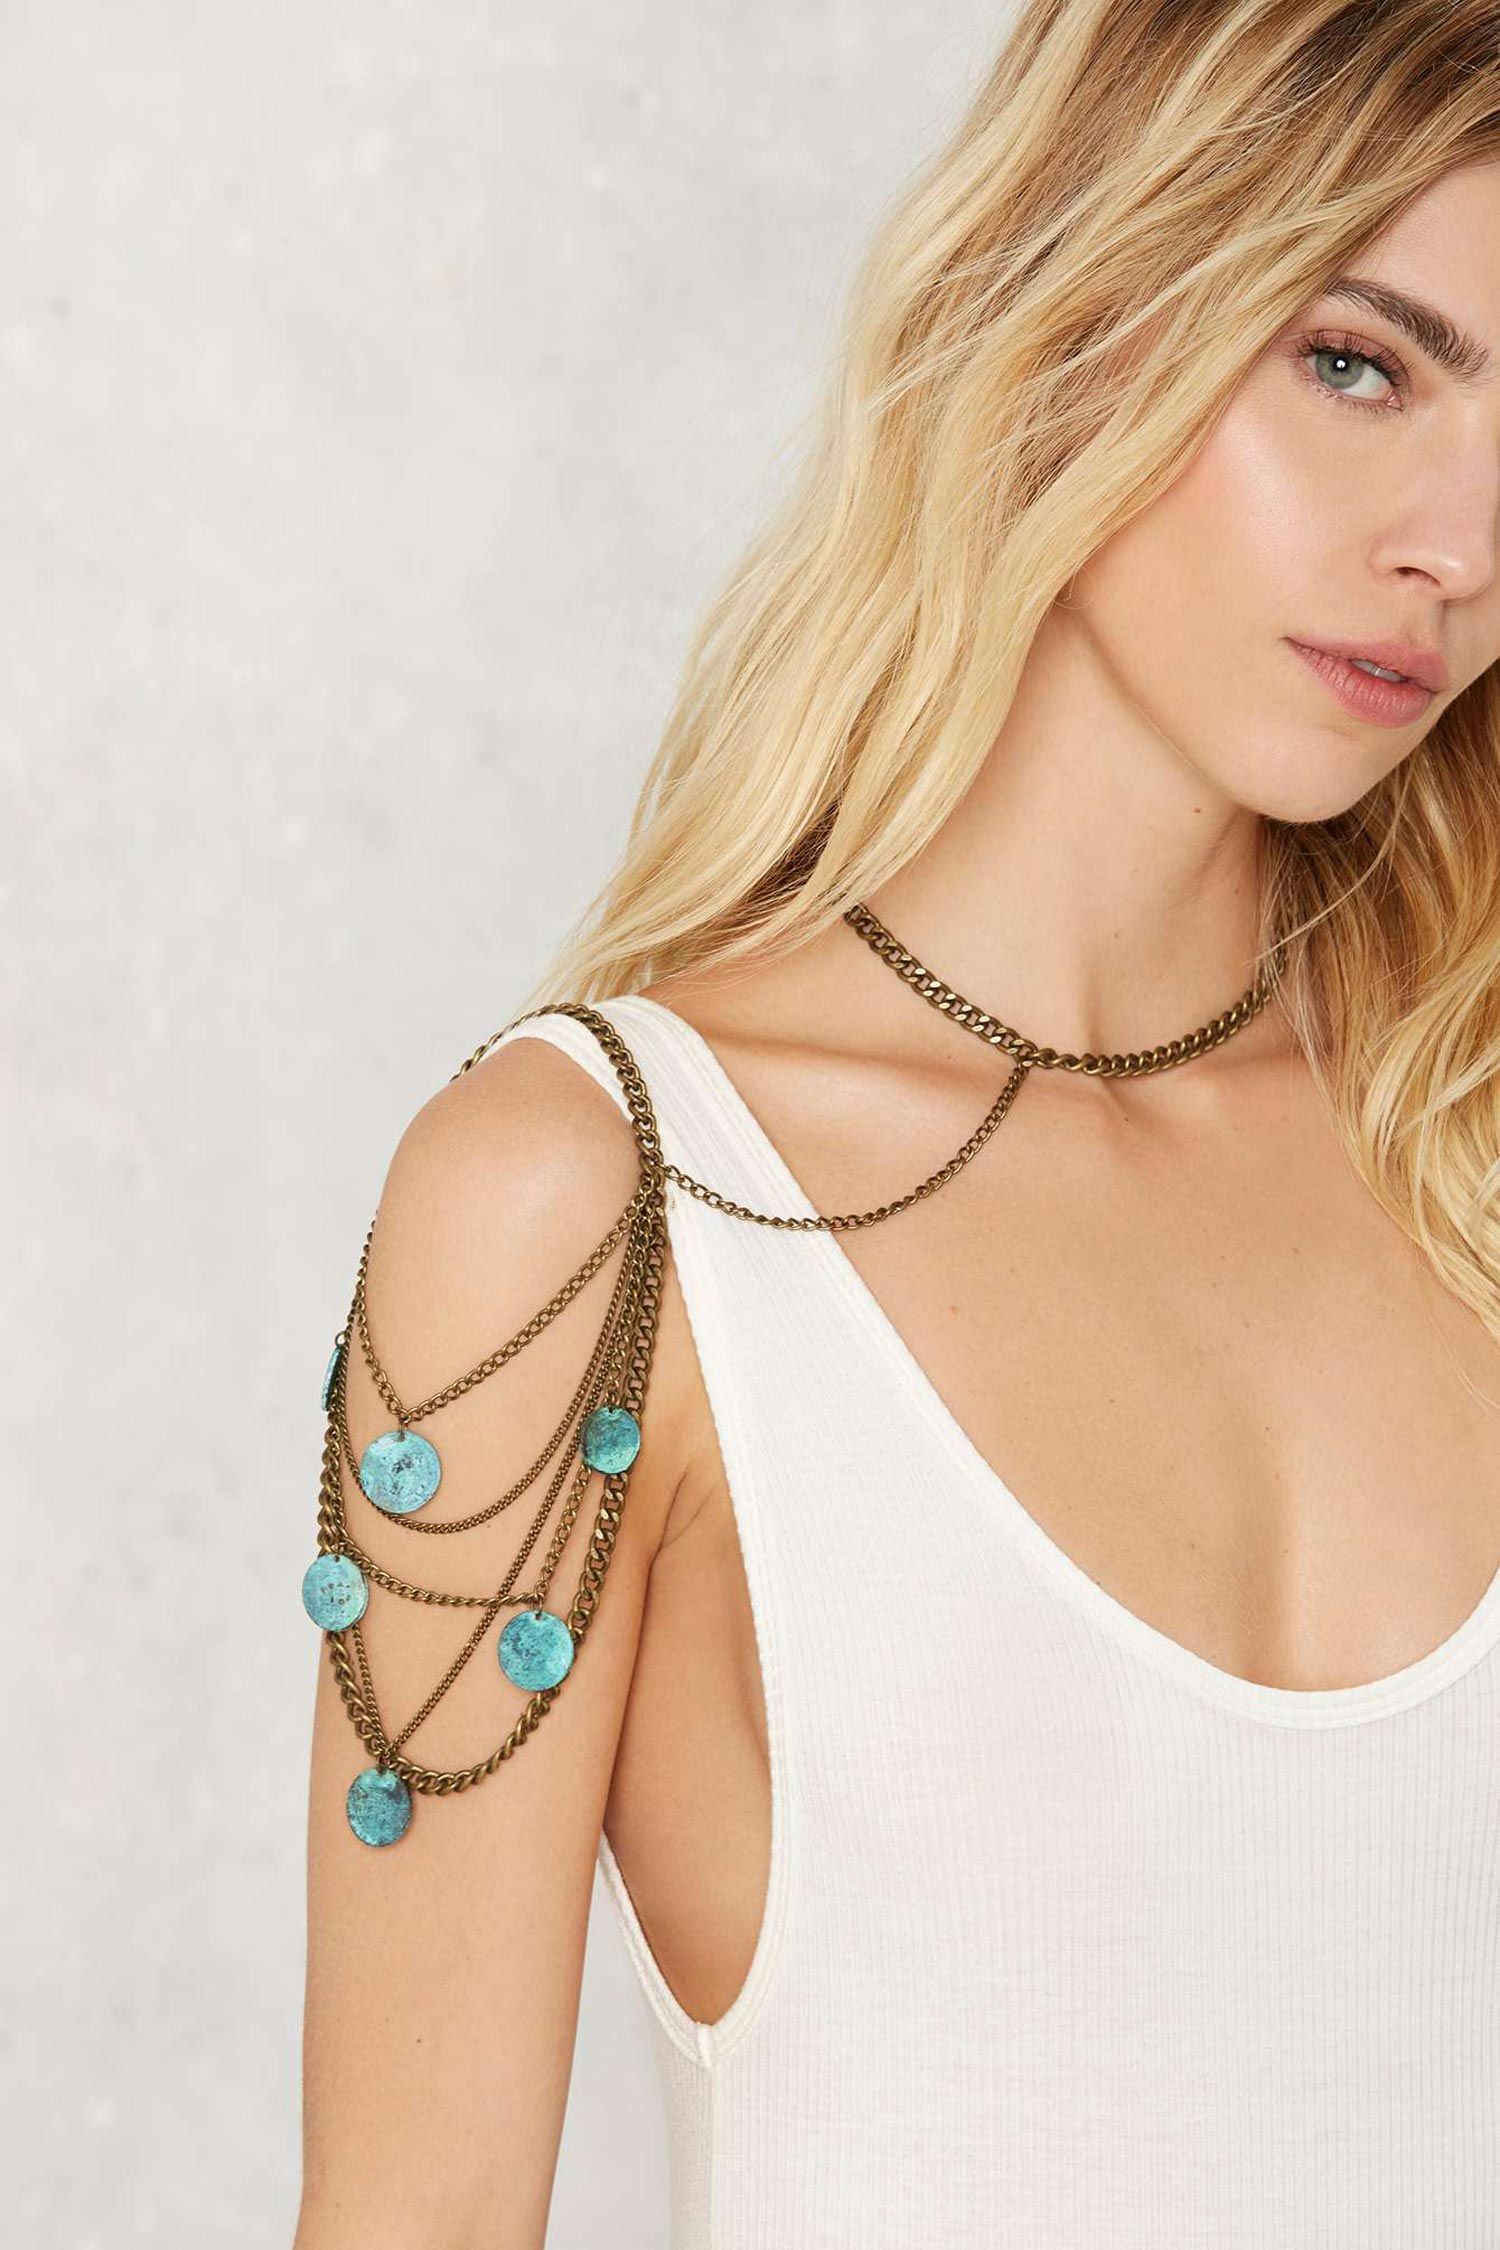 Best Body Chains and Body Necklaces - How to Wear Body